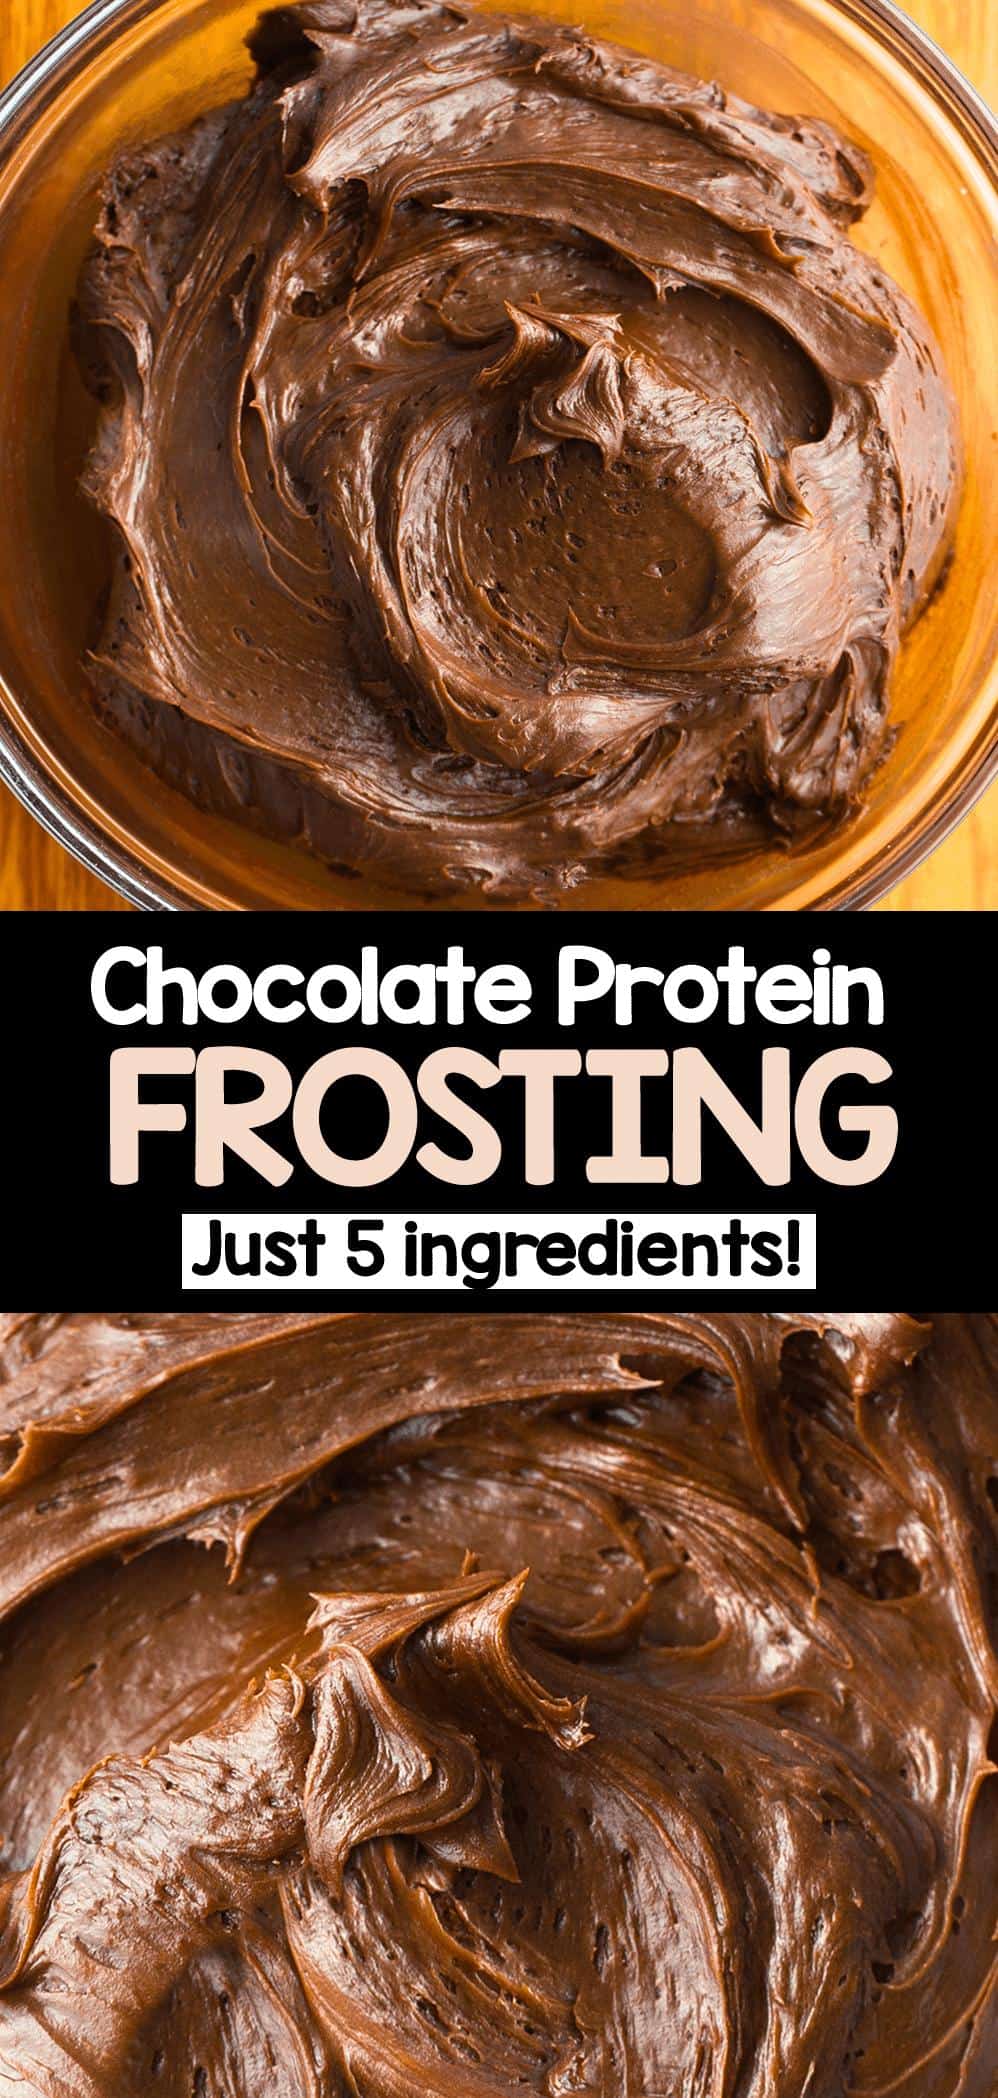 Sure thing! Here are some creative photo captions for the Chocolate Protein Frosting recipe: